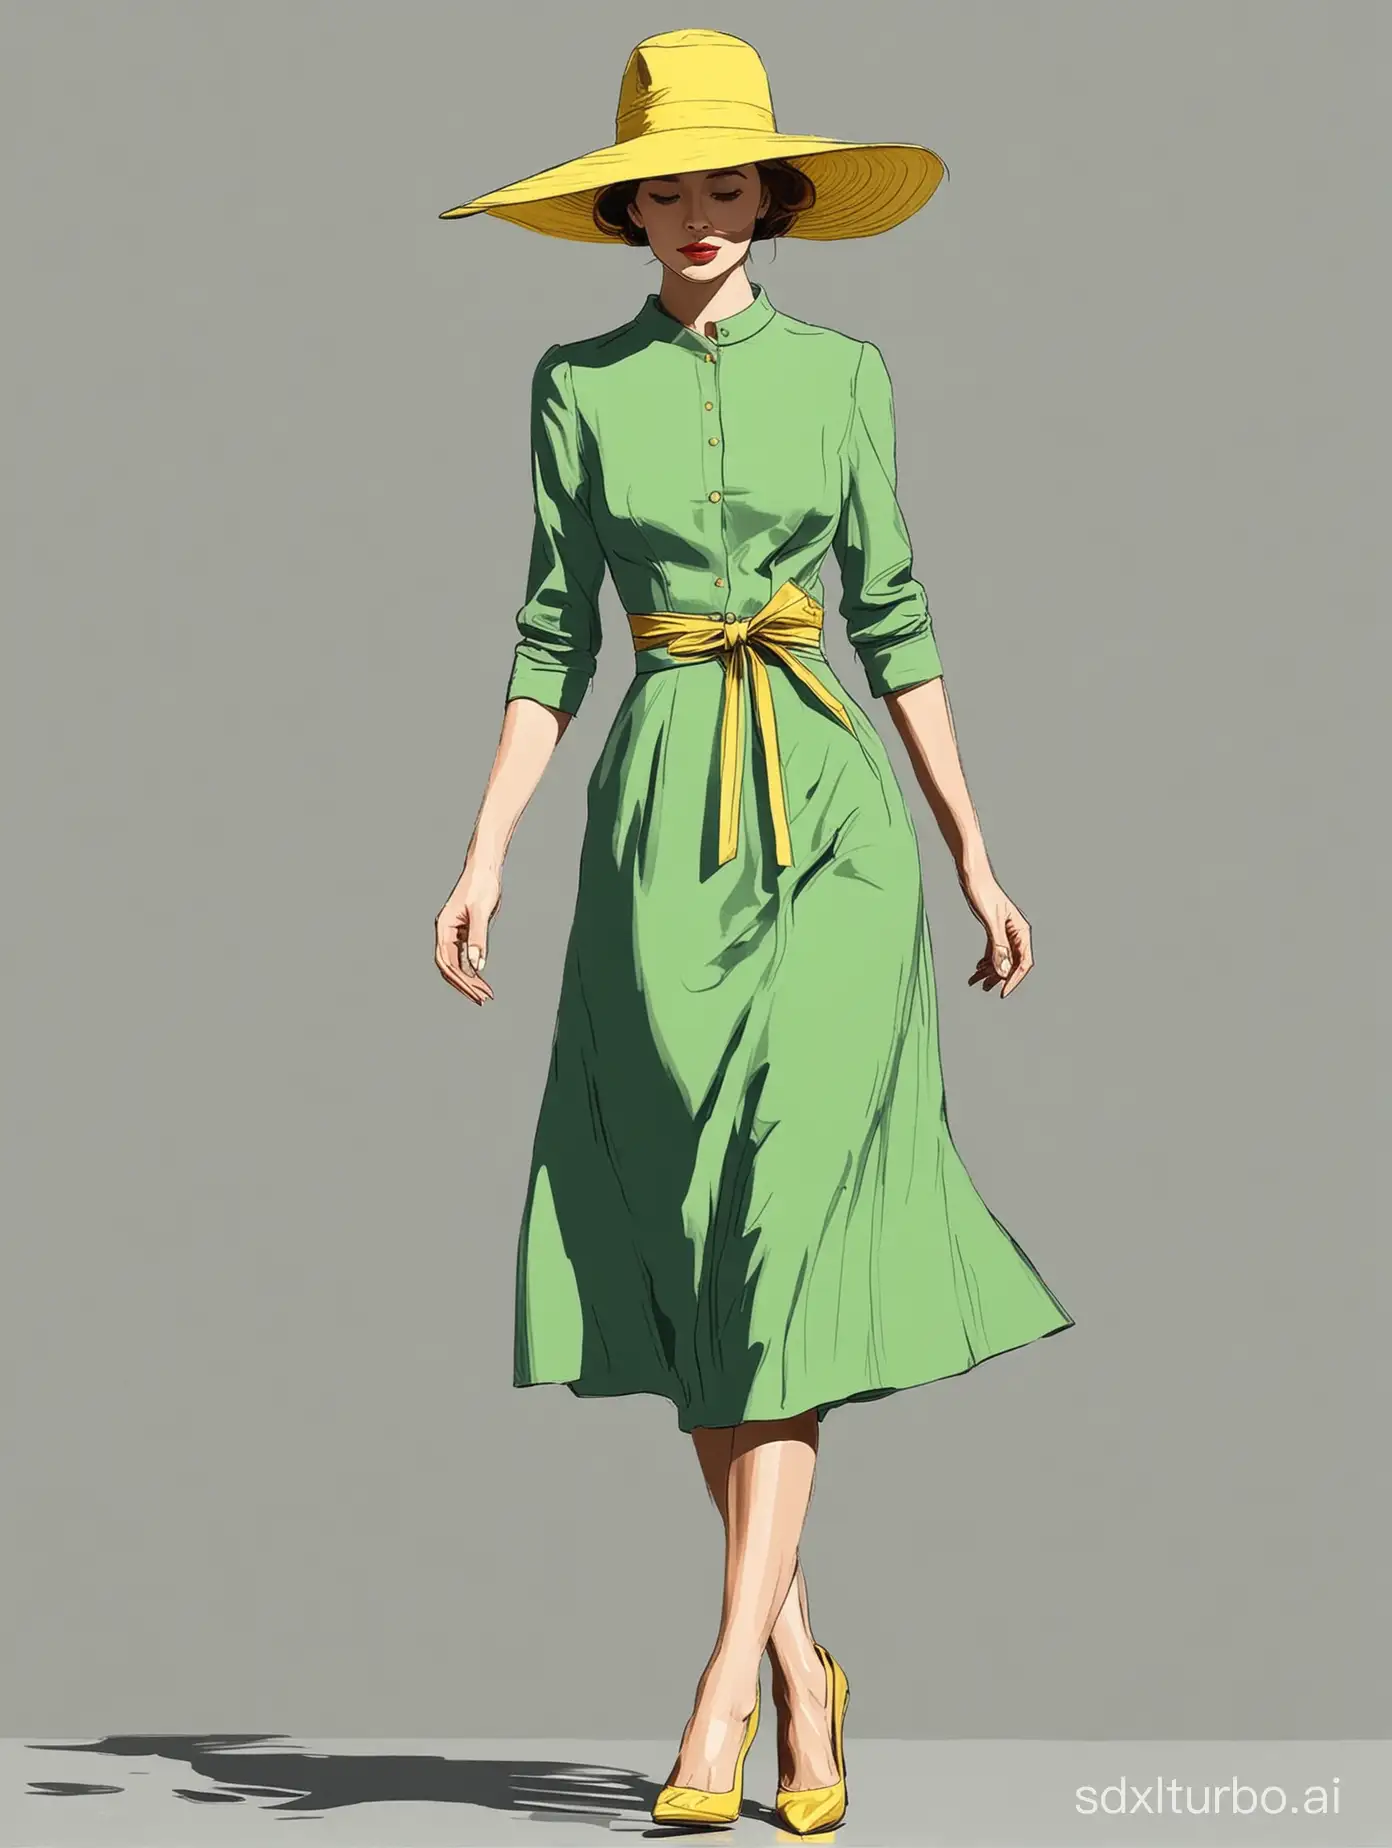 A woman in an elegant green dress and yellow hat walks along the runway, huge breast，her silhouette outlined with bold lines against a clean background. The minimalist style captures every detail of her figure with simple shapes and clear lines, creating a sense of sophistication that resonates across all art forms. High resolution. Black line illustration in the style of on White Background.